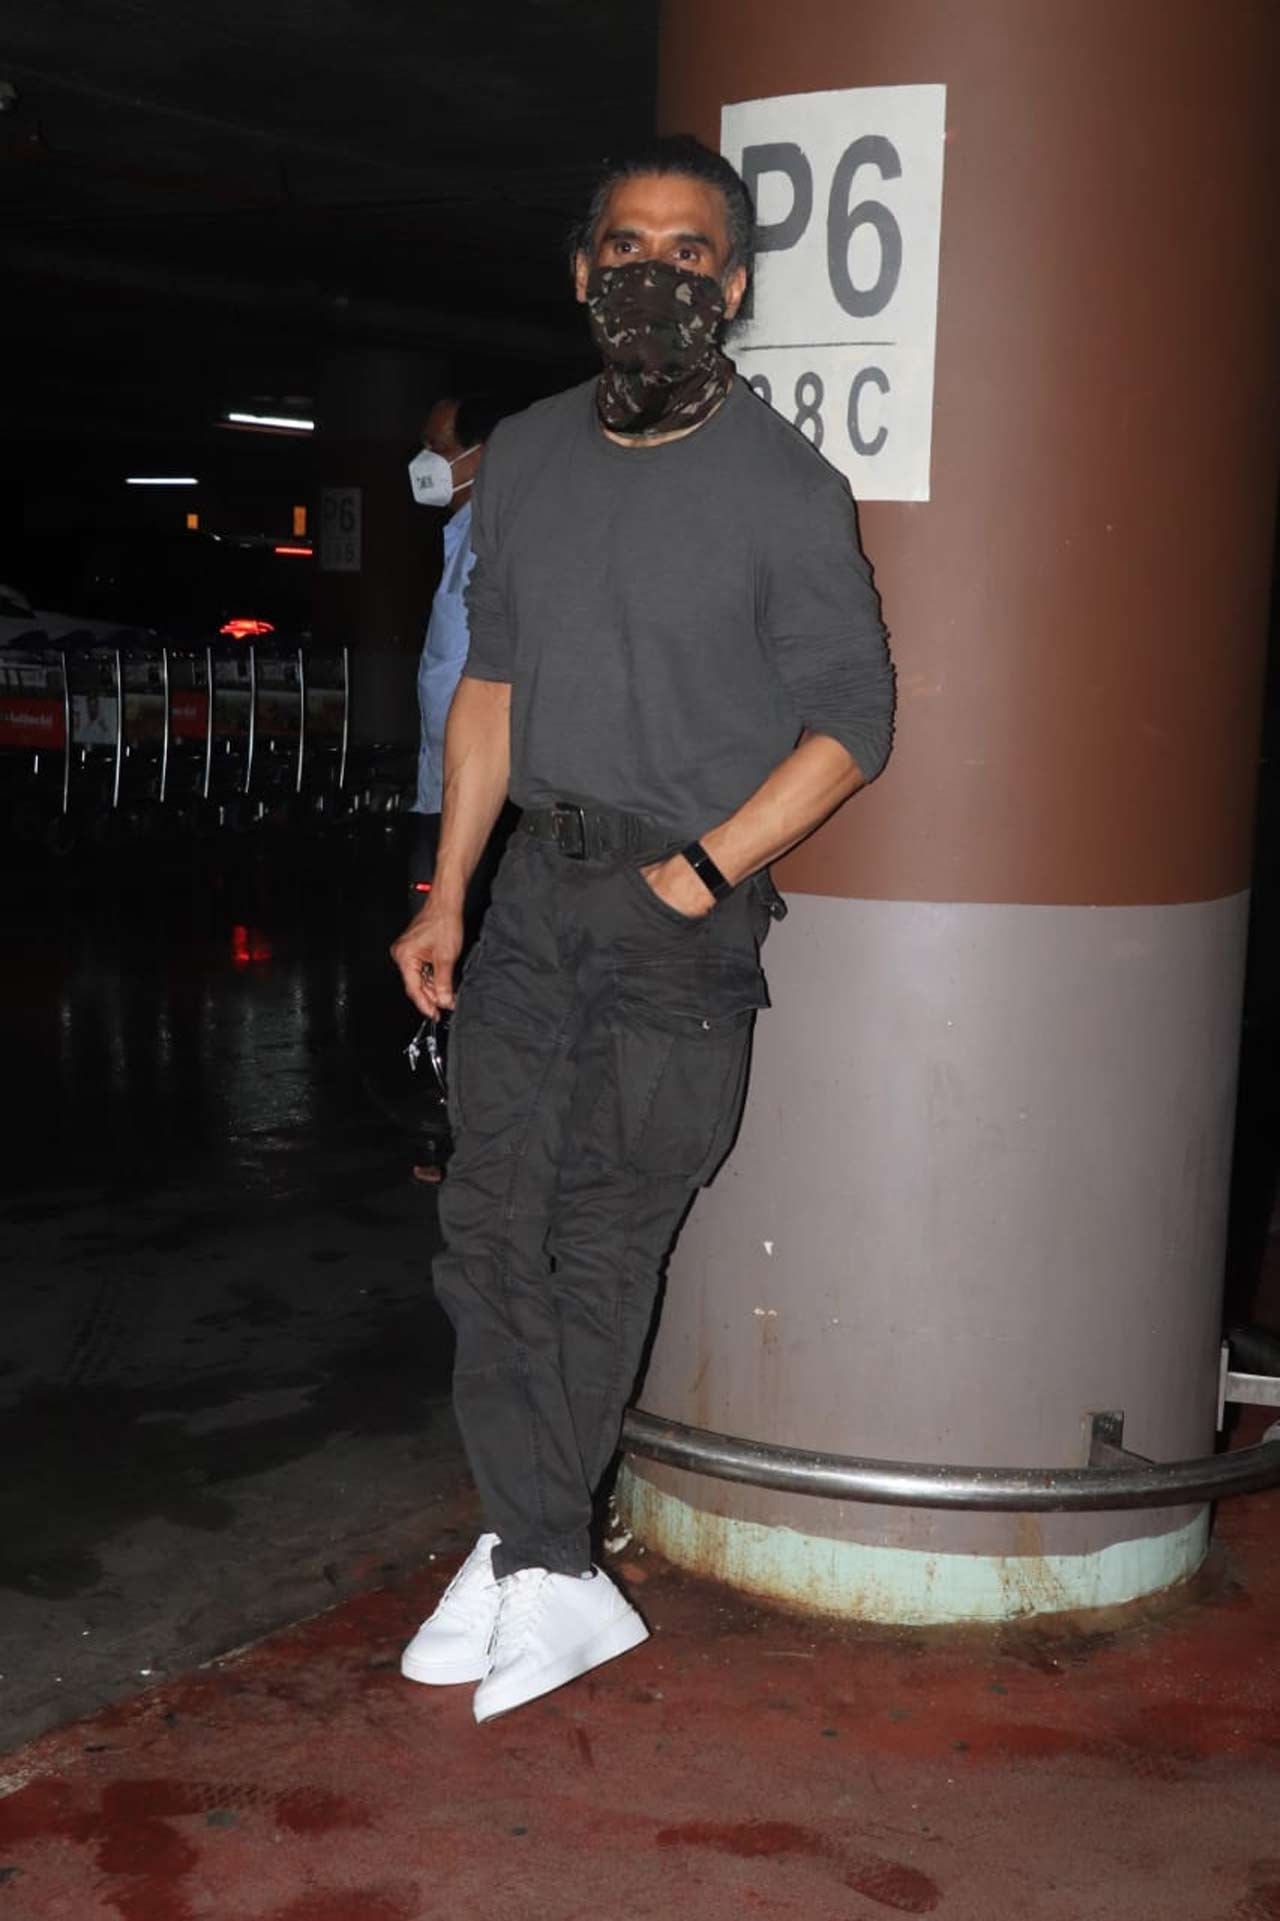 Suniel Shetty posed for the paparazzi when snapped at the Mumbai airport.